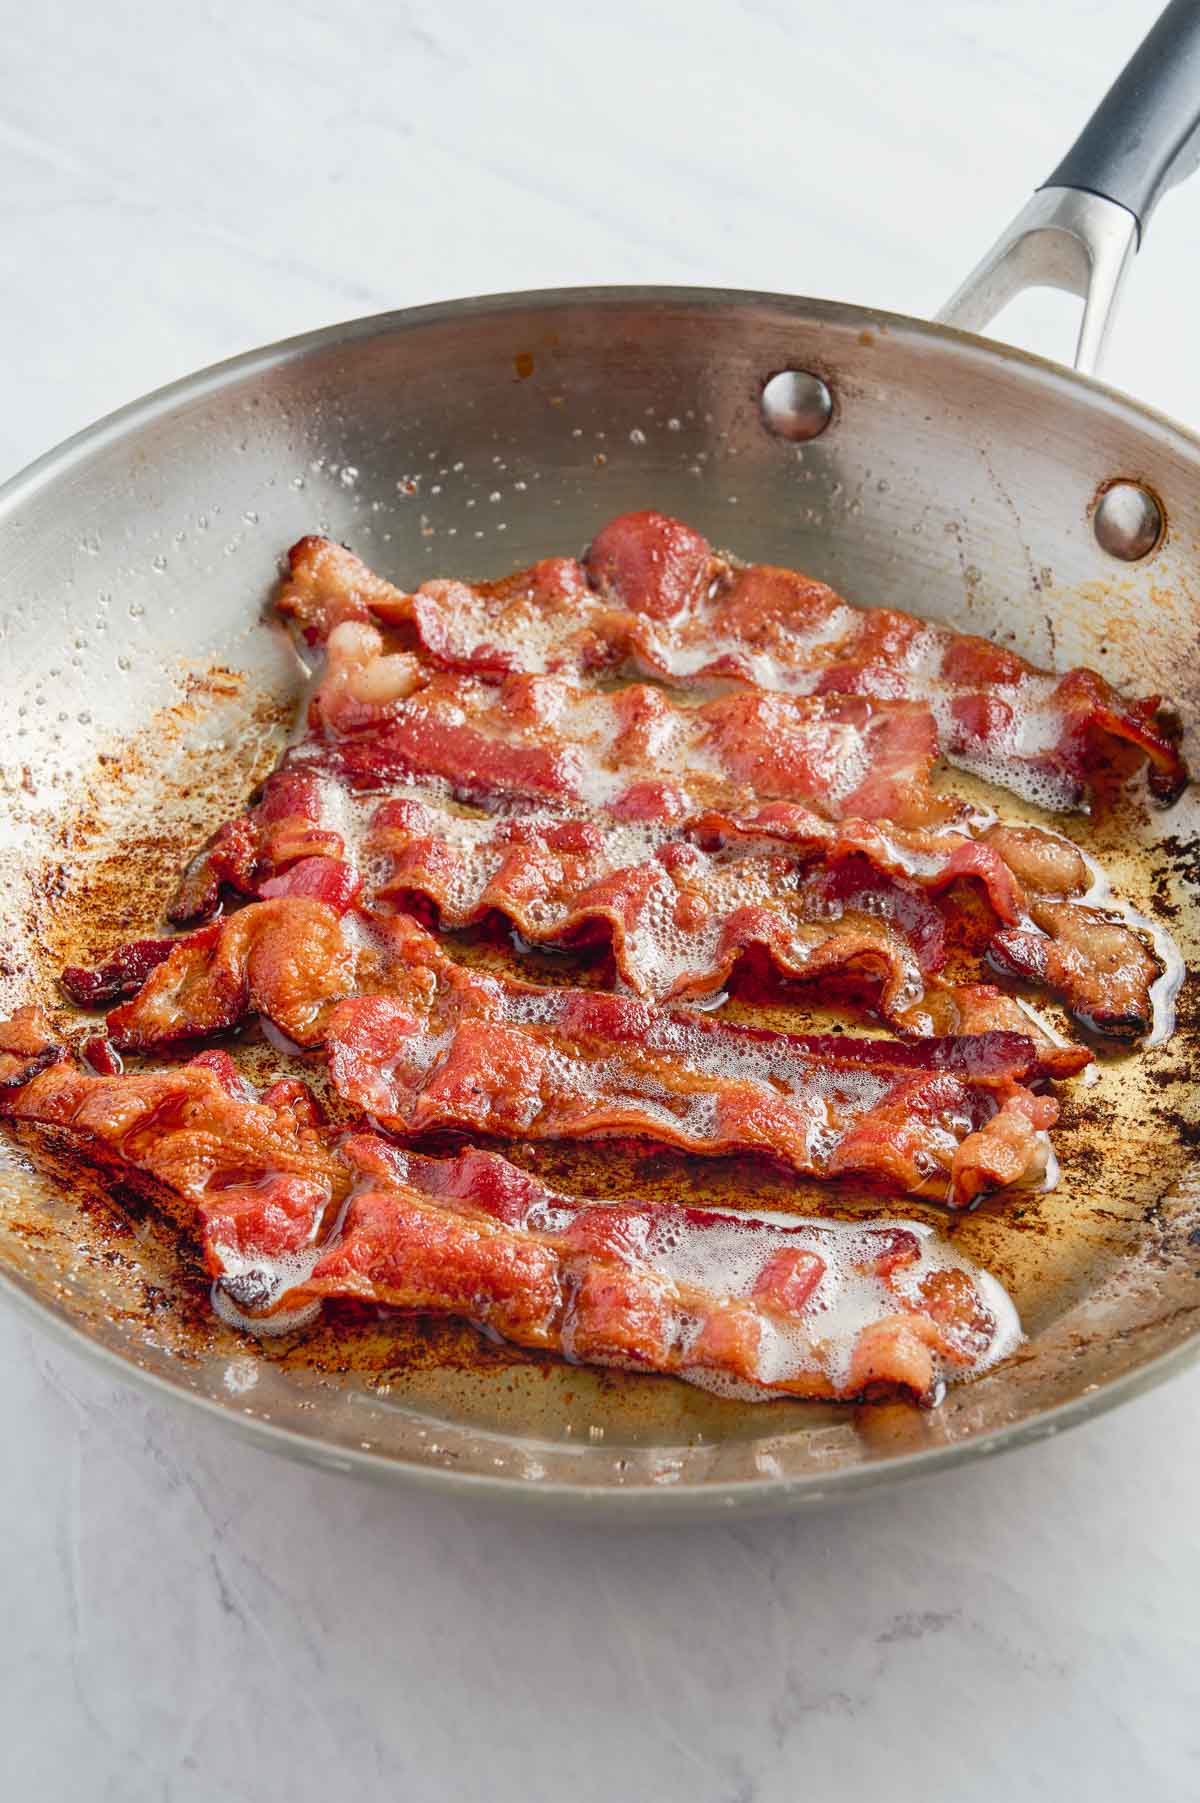 How to Cook Bacon (3 Easy Ways!) - Evolving Table